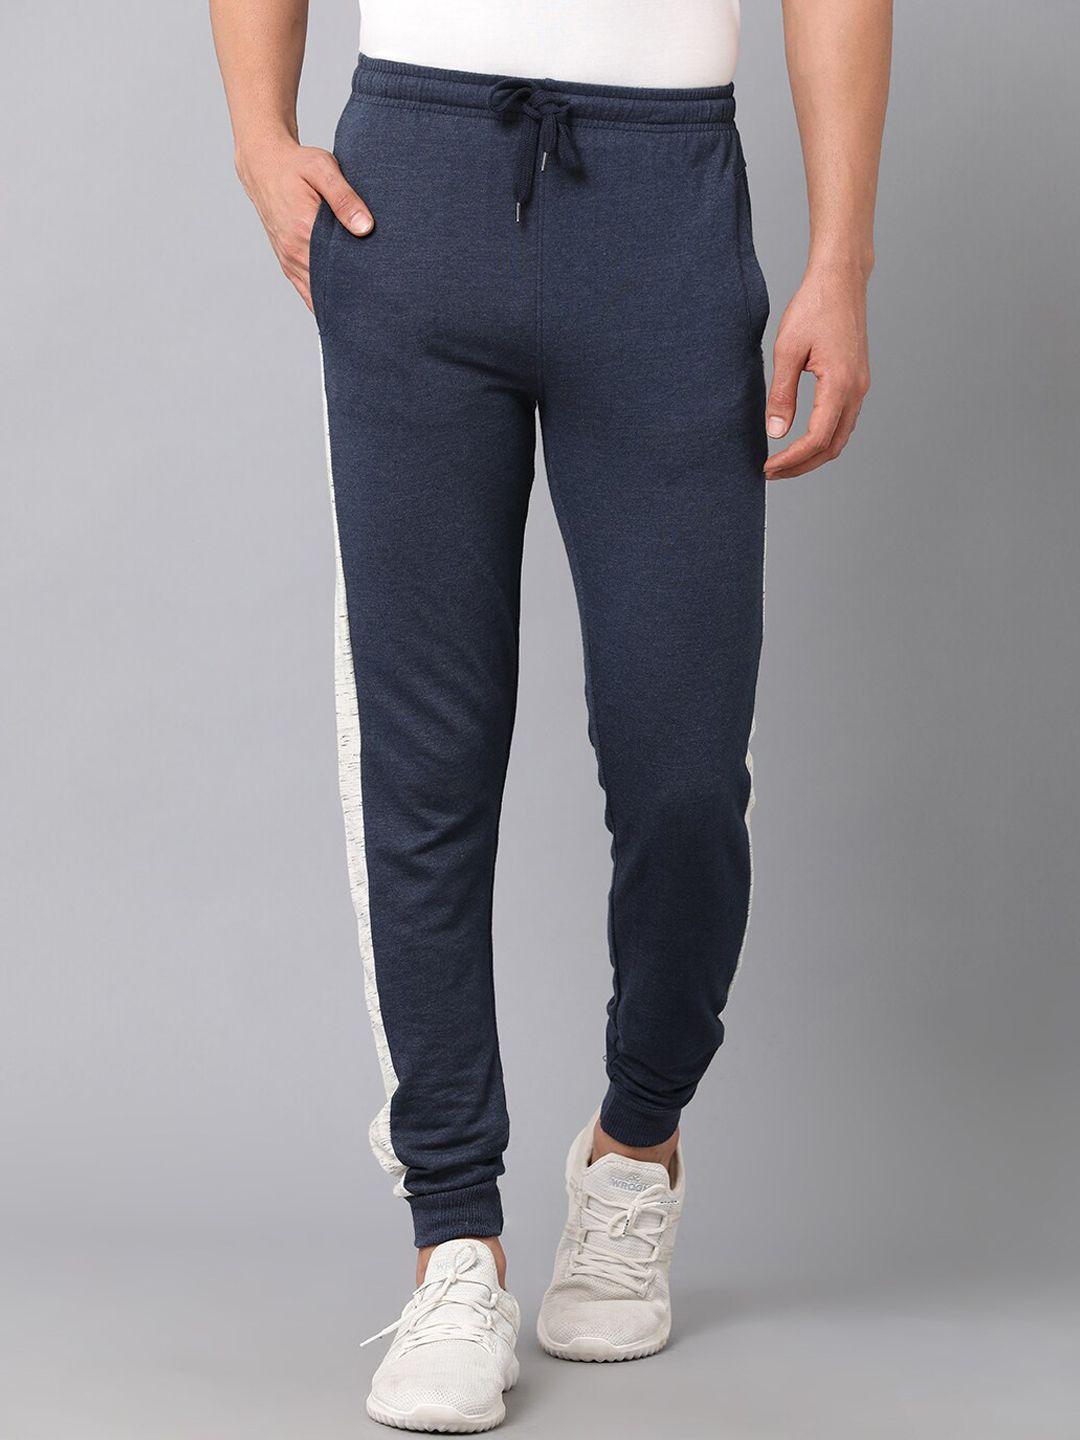 madsto-men-navy-blue-solid-slim-fit-cotton-joggers